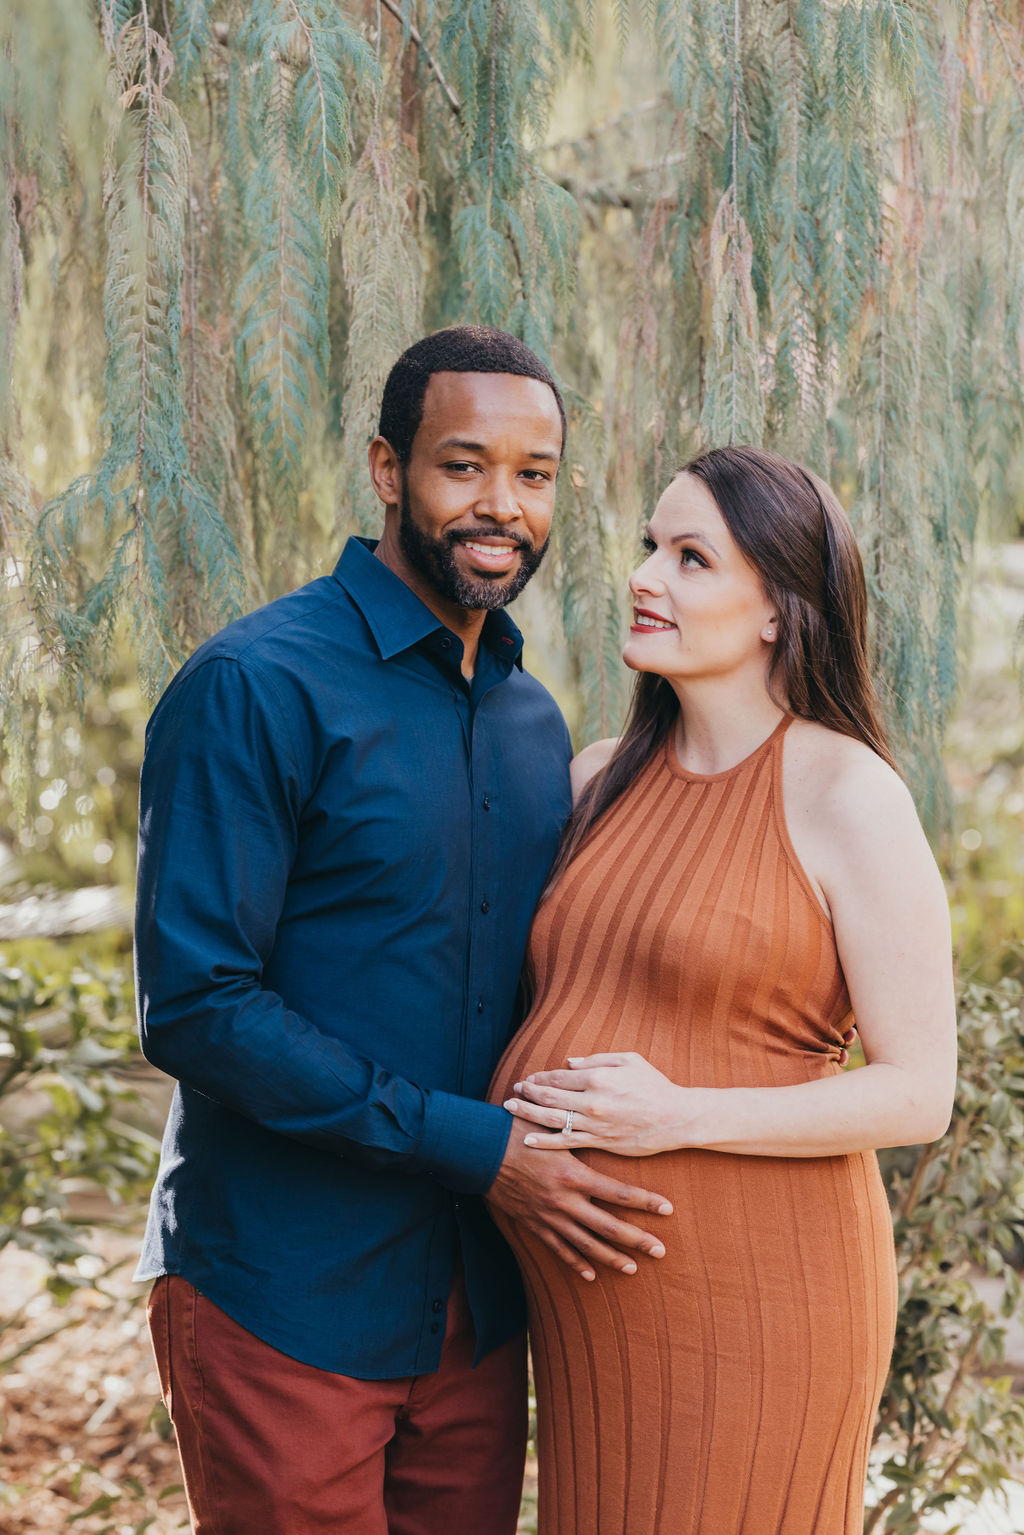 A couple expecting a baby standing together in a garden, with the woman cradling her pregnant belly at their spring maternity photos